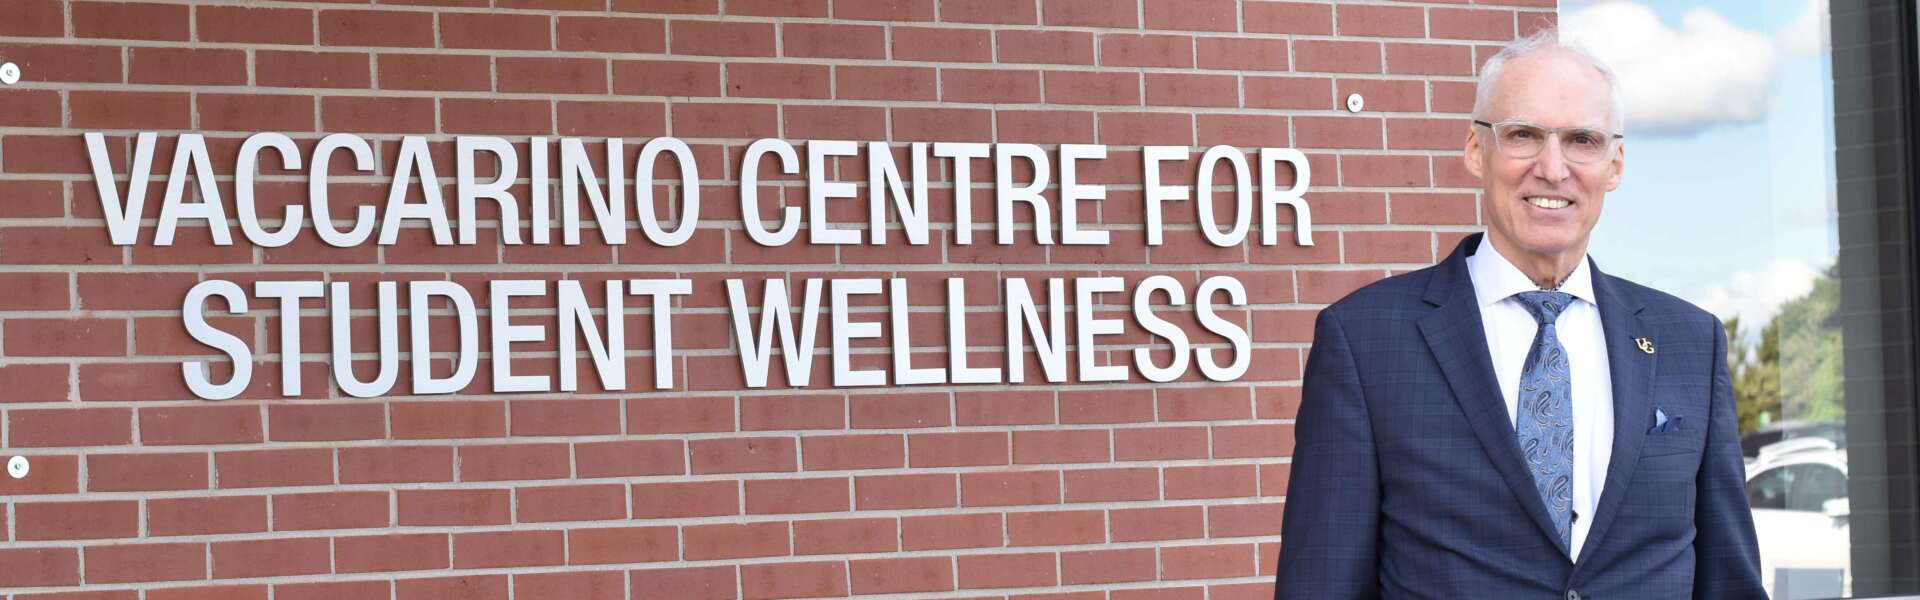 Former U of G president Franco Vaccarino stands against a brick wall with a sign that reads 'Vaccarino Centre for Student Wellness'